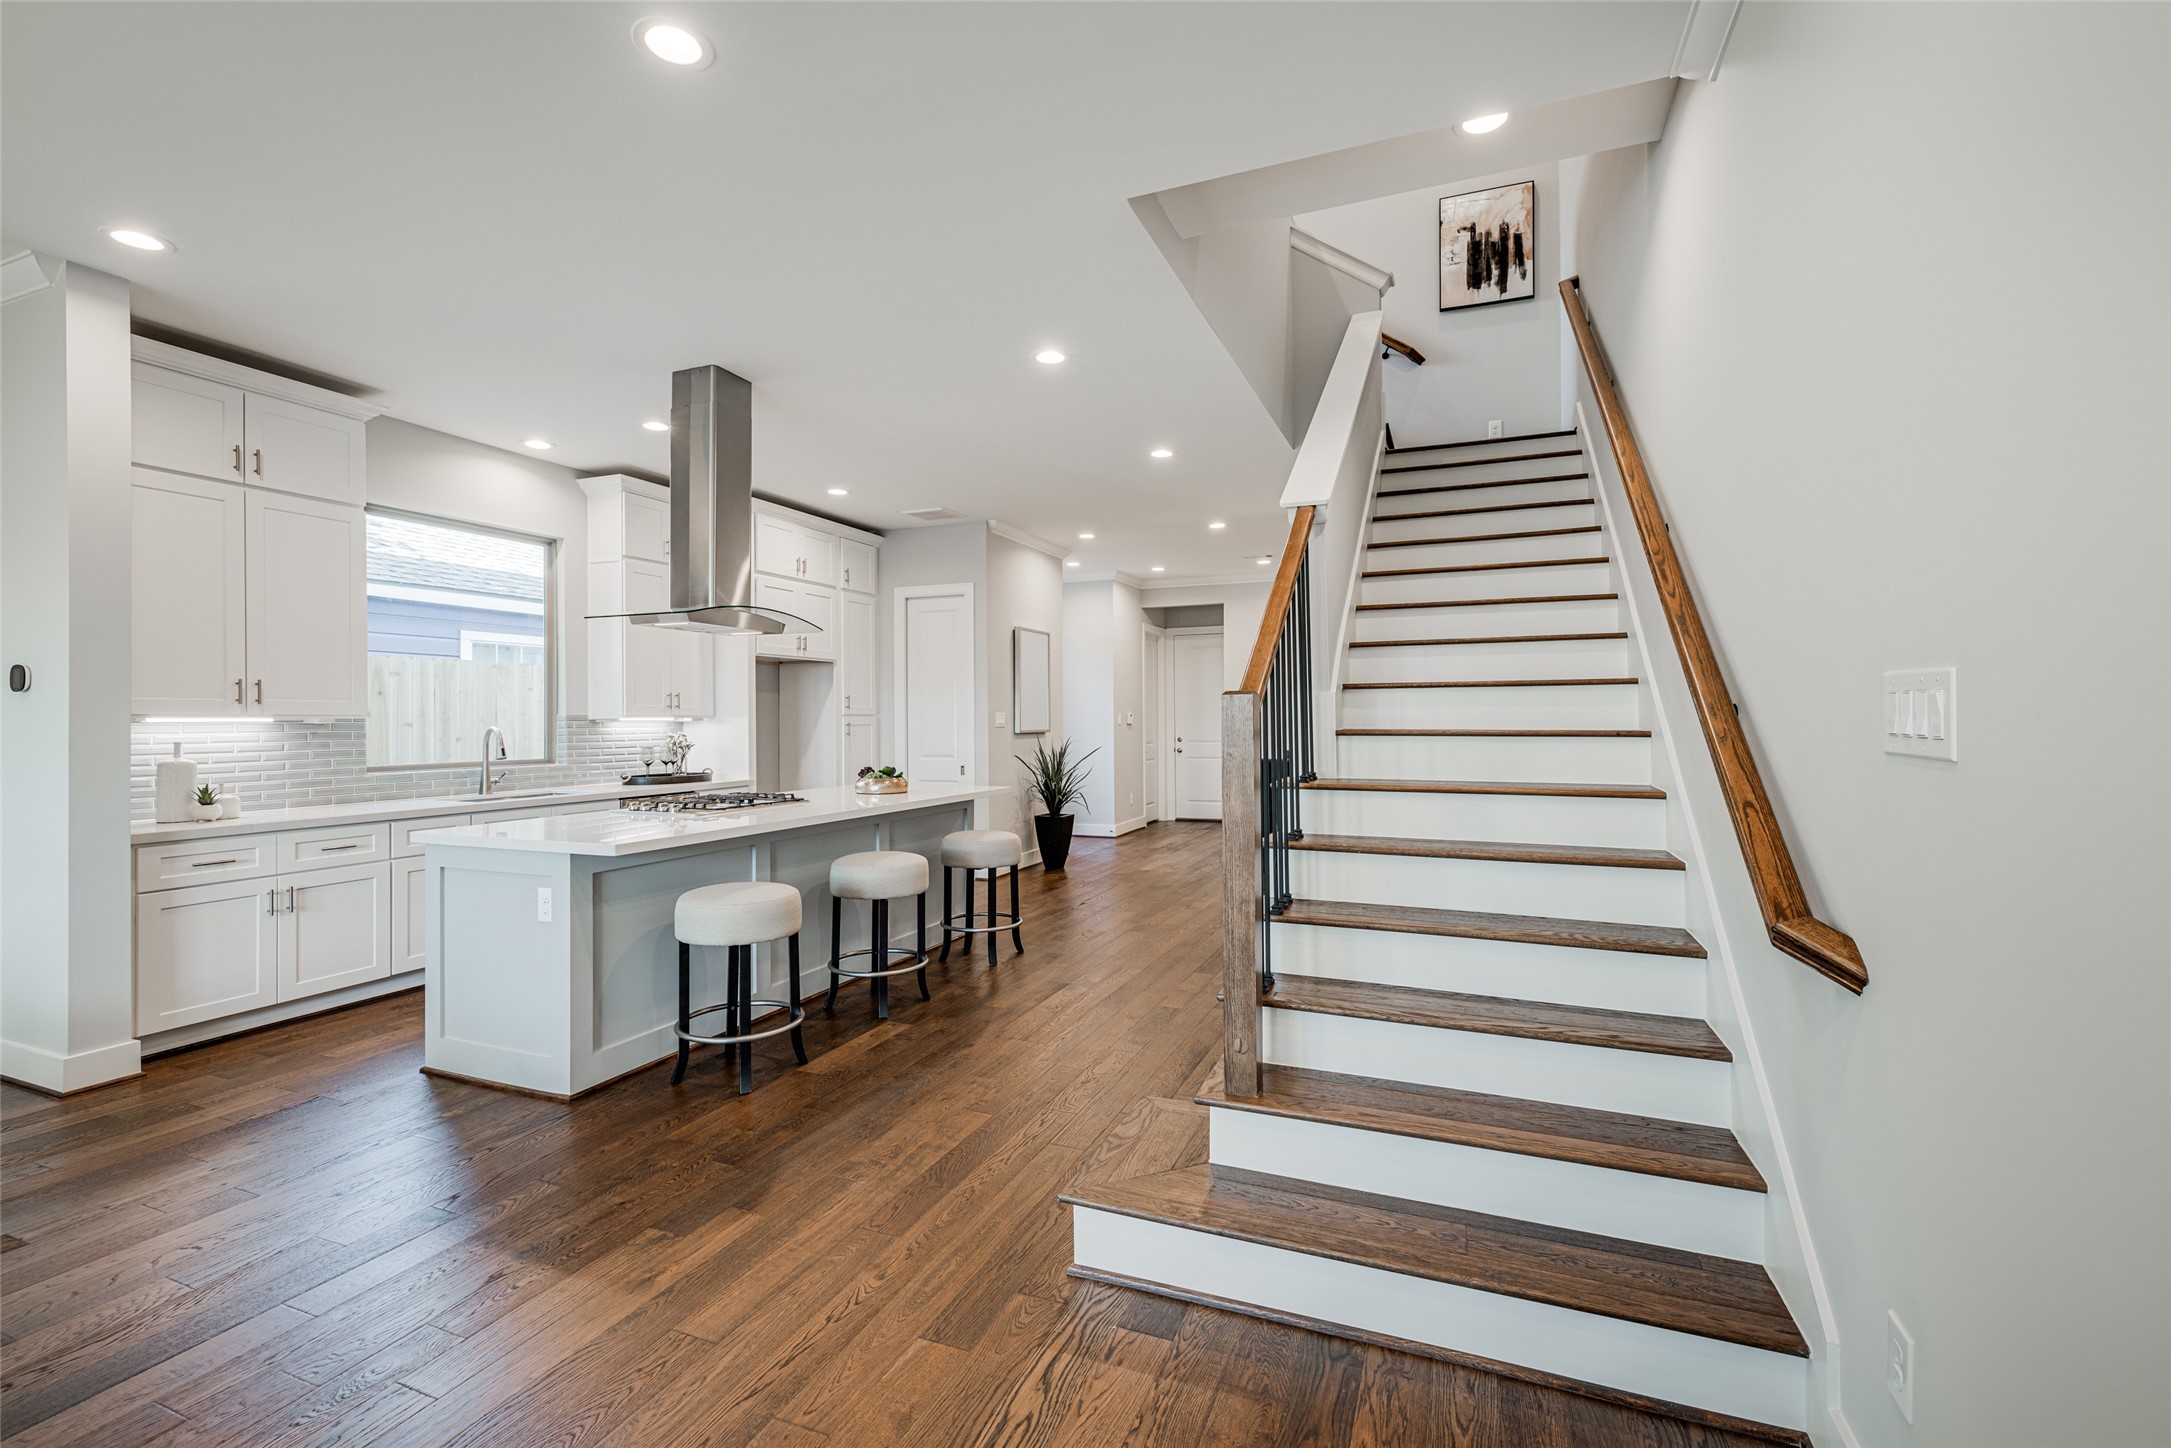 ASK ABOUT CUSTOMIZATION OPTIONS DURING CONSTRUCTION ONLY * MAZZTAO MODEL HOME * PHOTOS MAY SHOW A SIMILAR FLOOR PLAN AND/OR UPGRADED/ALTERNATIVE FINISHES * Please use these photos as a guide *